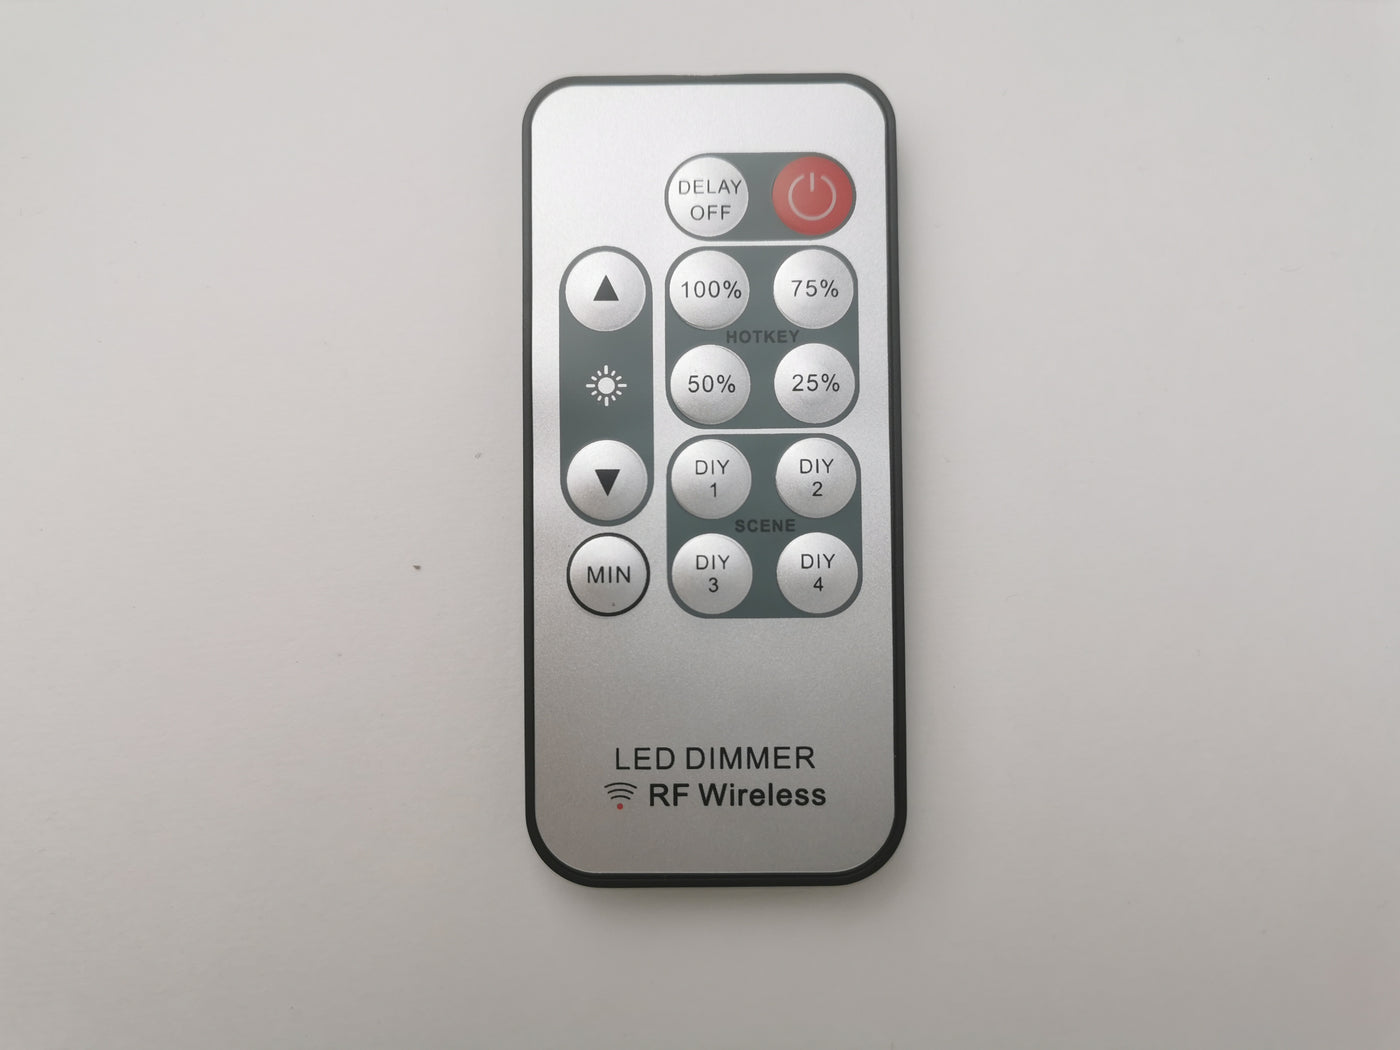 Spare Remote Control for Dimmer Unit - S14 15M, A19 10M, A60 10M, G80 10M, ST58 10M Collections